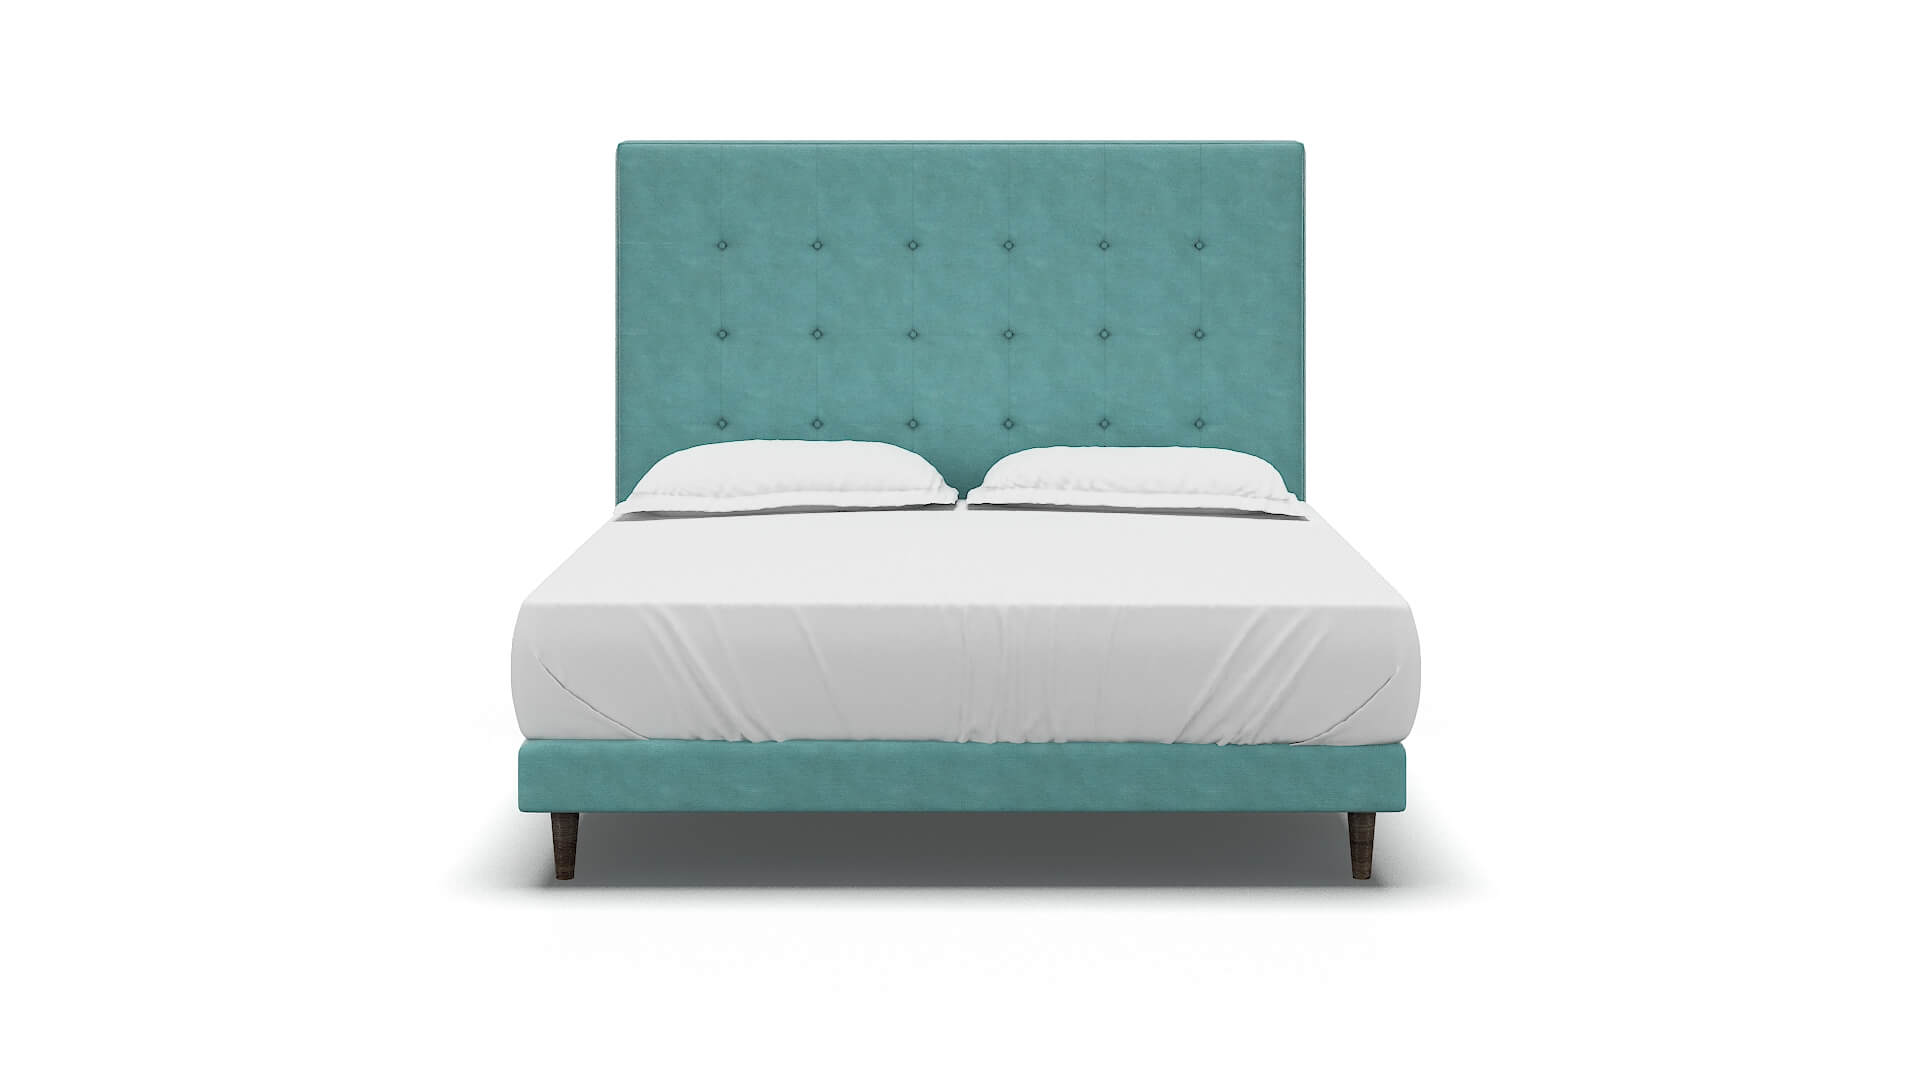 Jolie Curious Turquoise Bed King espresso legs 1